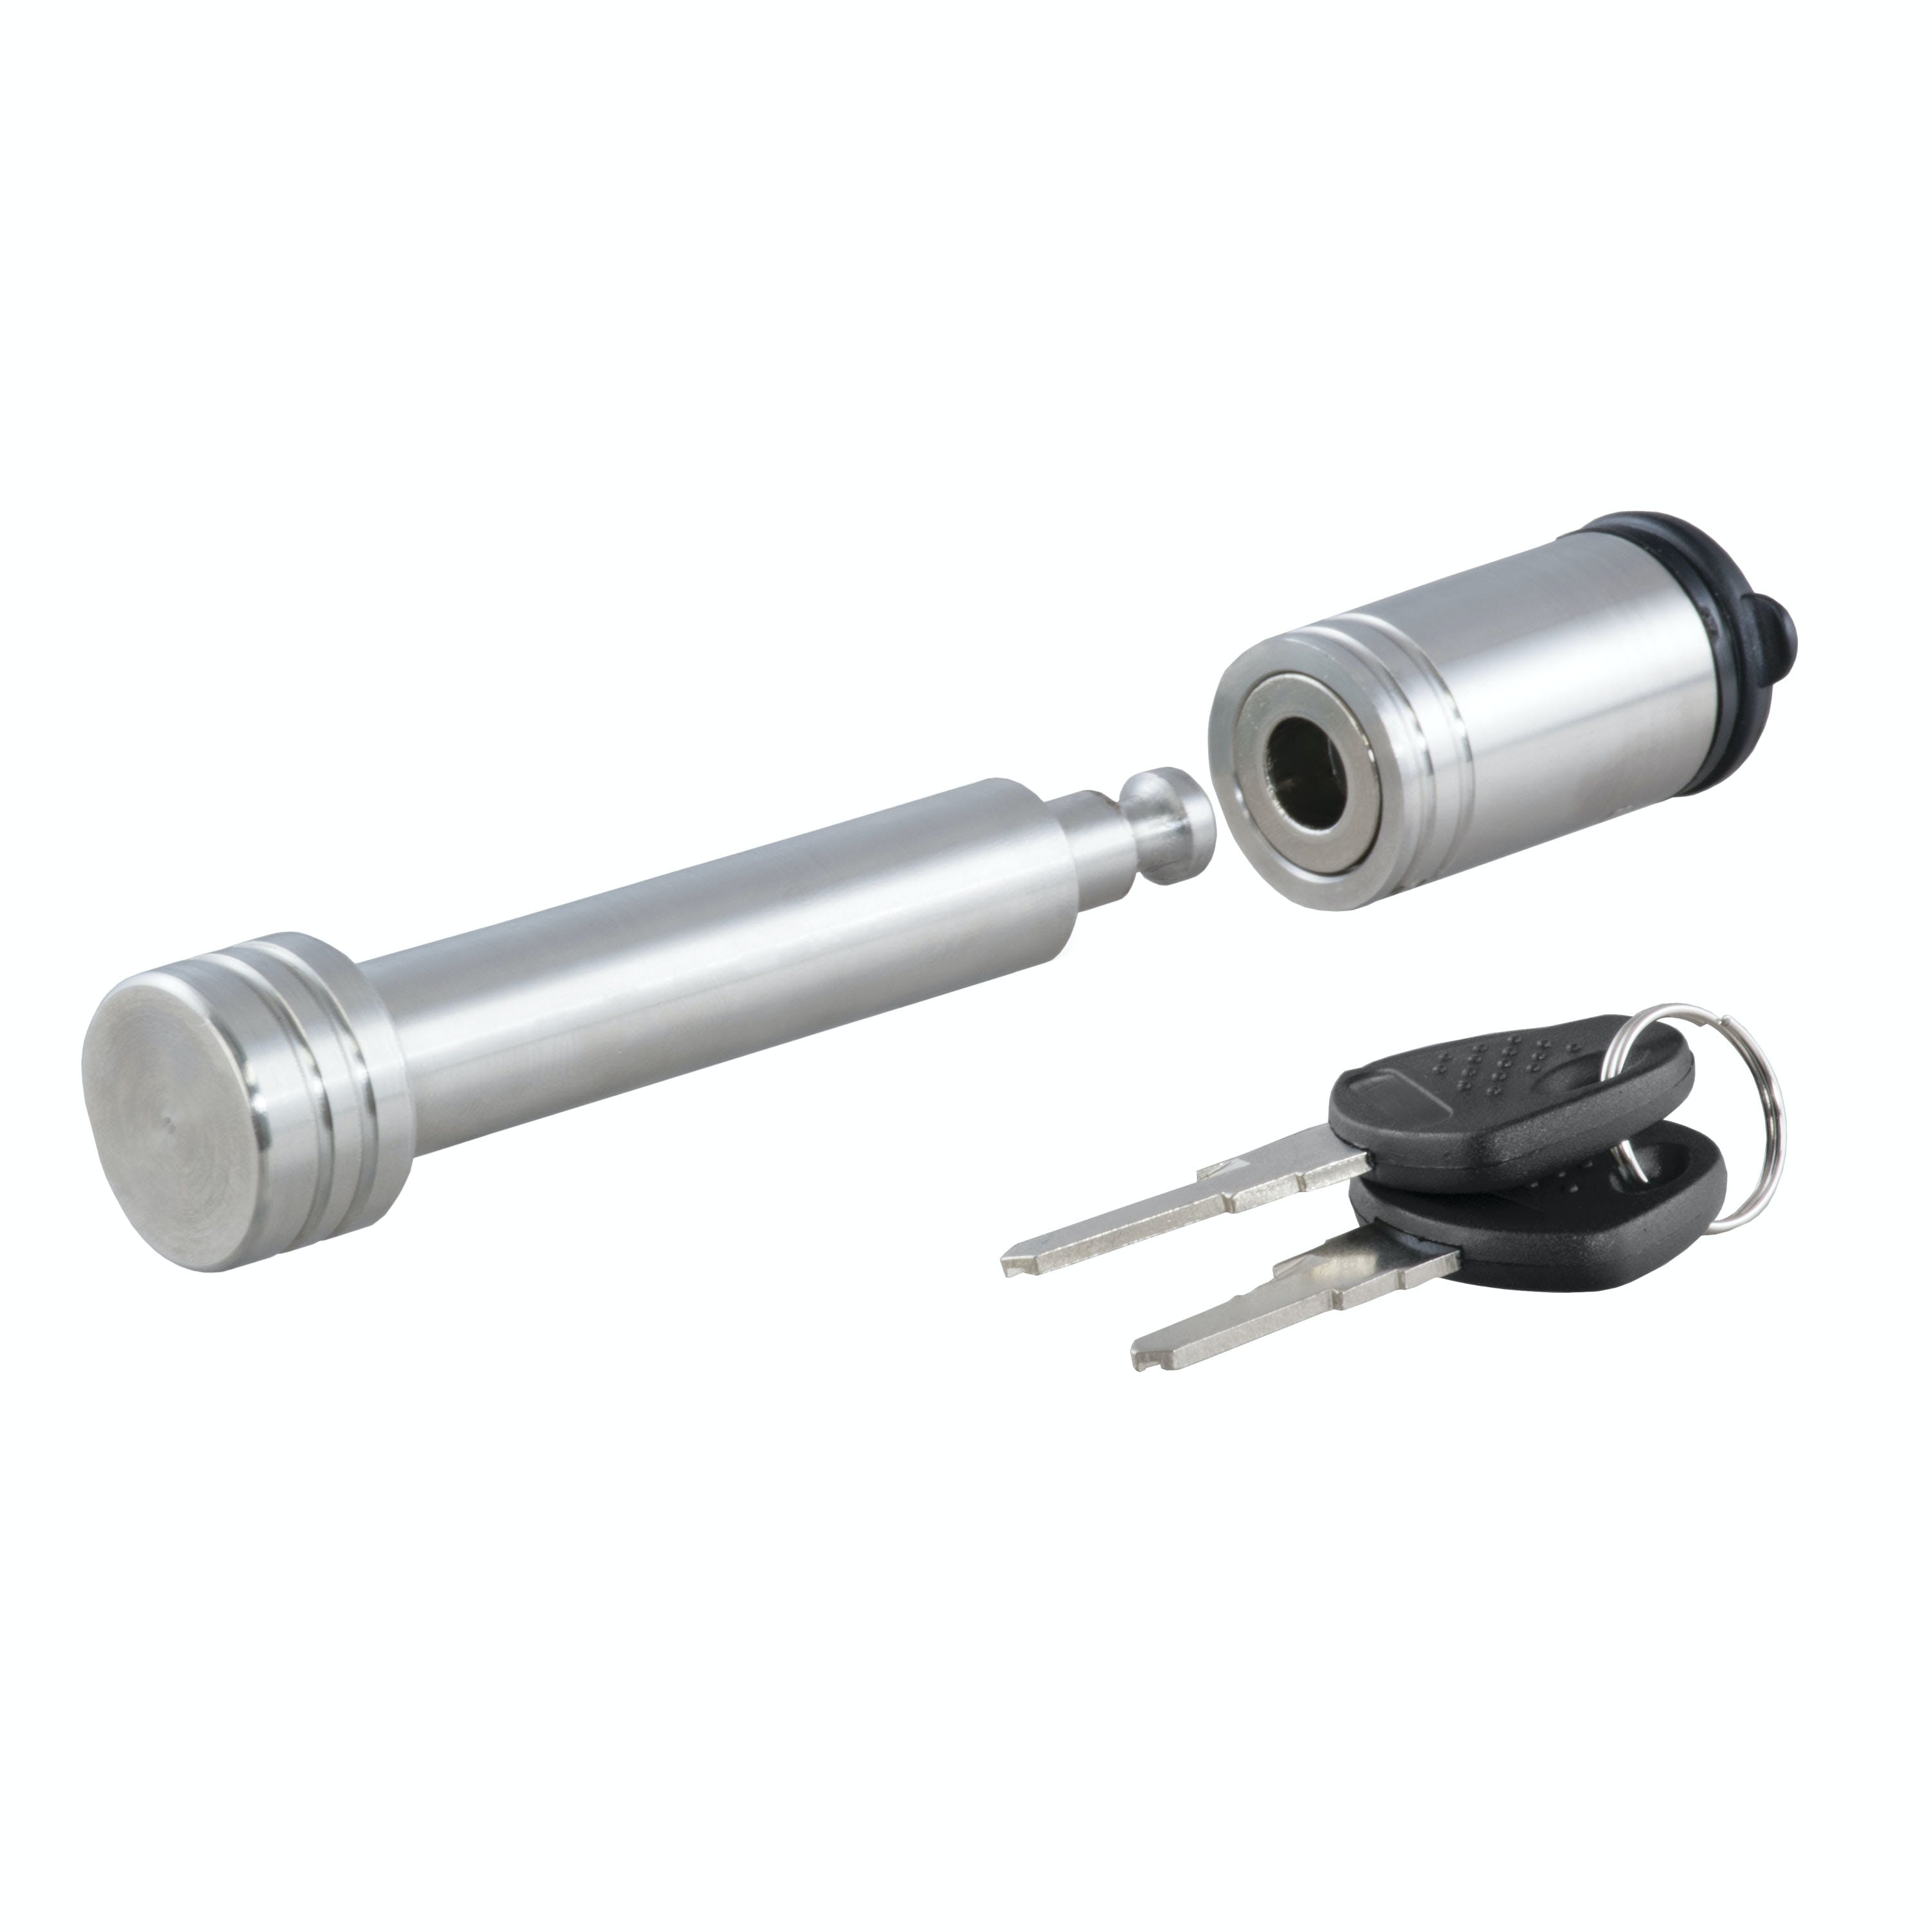 CURT 23516 5/8 Hitch Lock (2 Receiver, Barbell, Stainless)